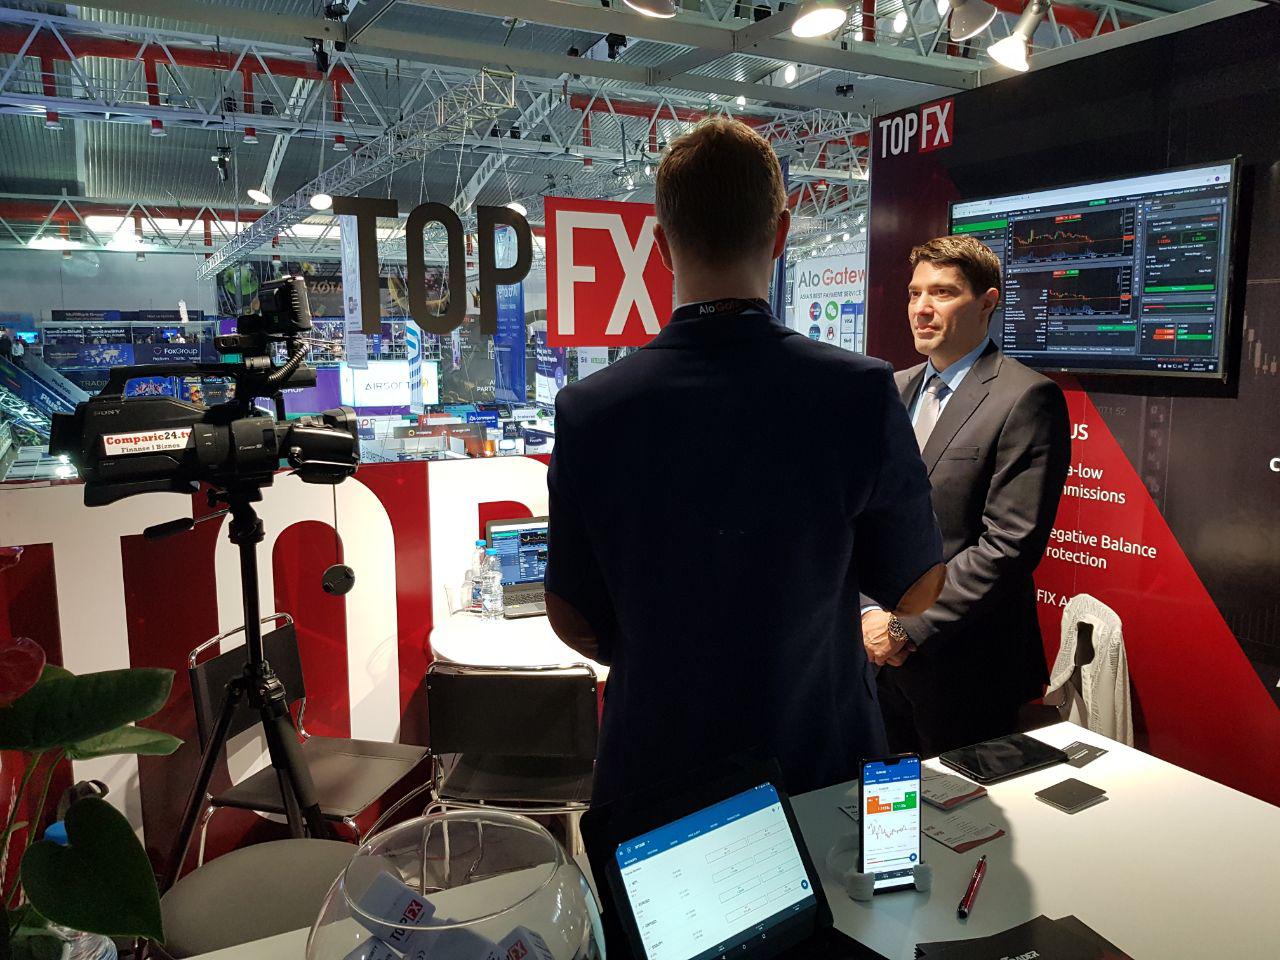 TopFX CEO Alex Katsaros being interviewed by Comparic Media Group at the iFX Expo